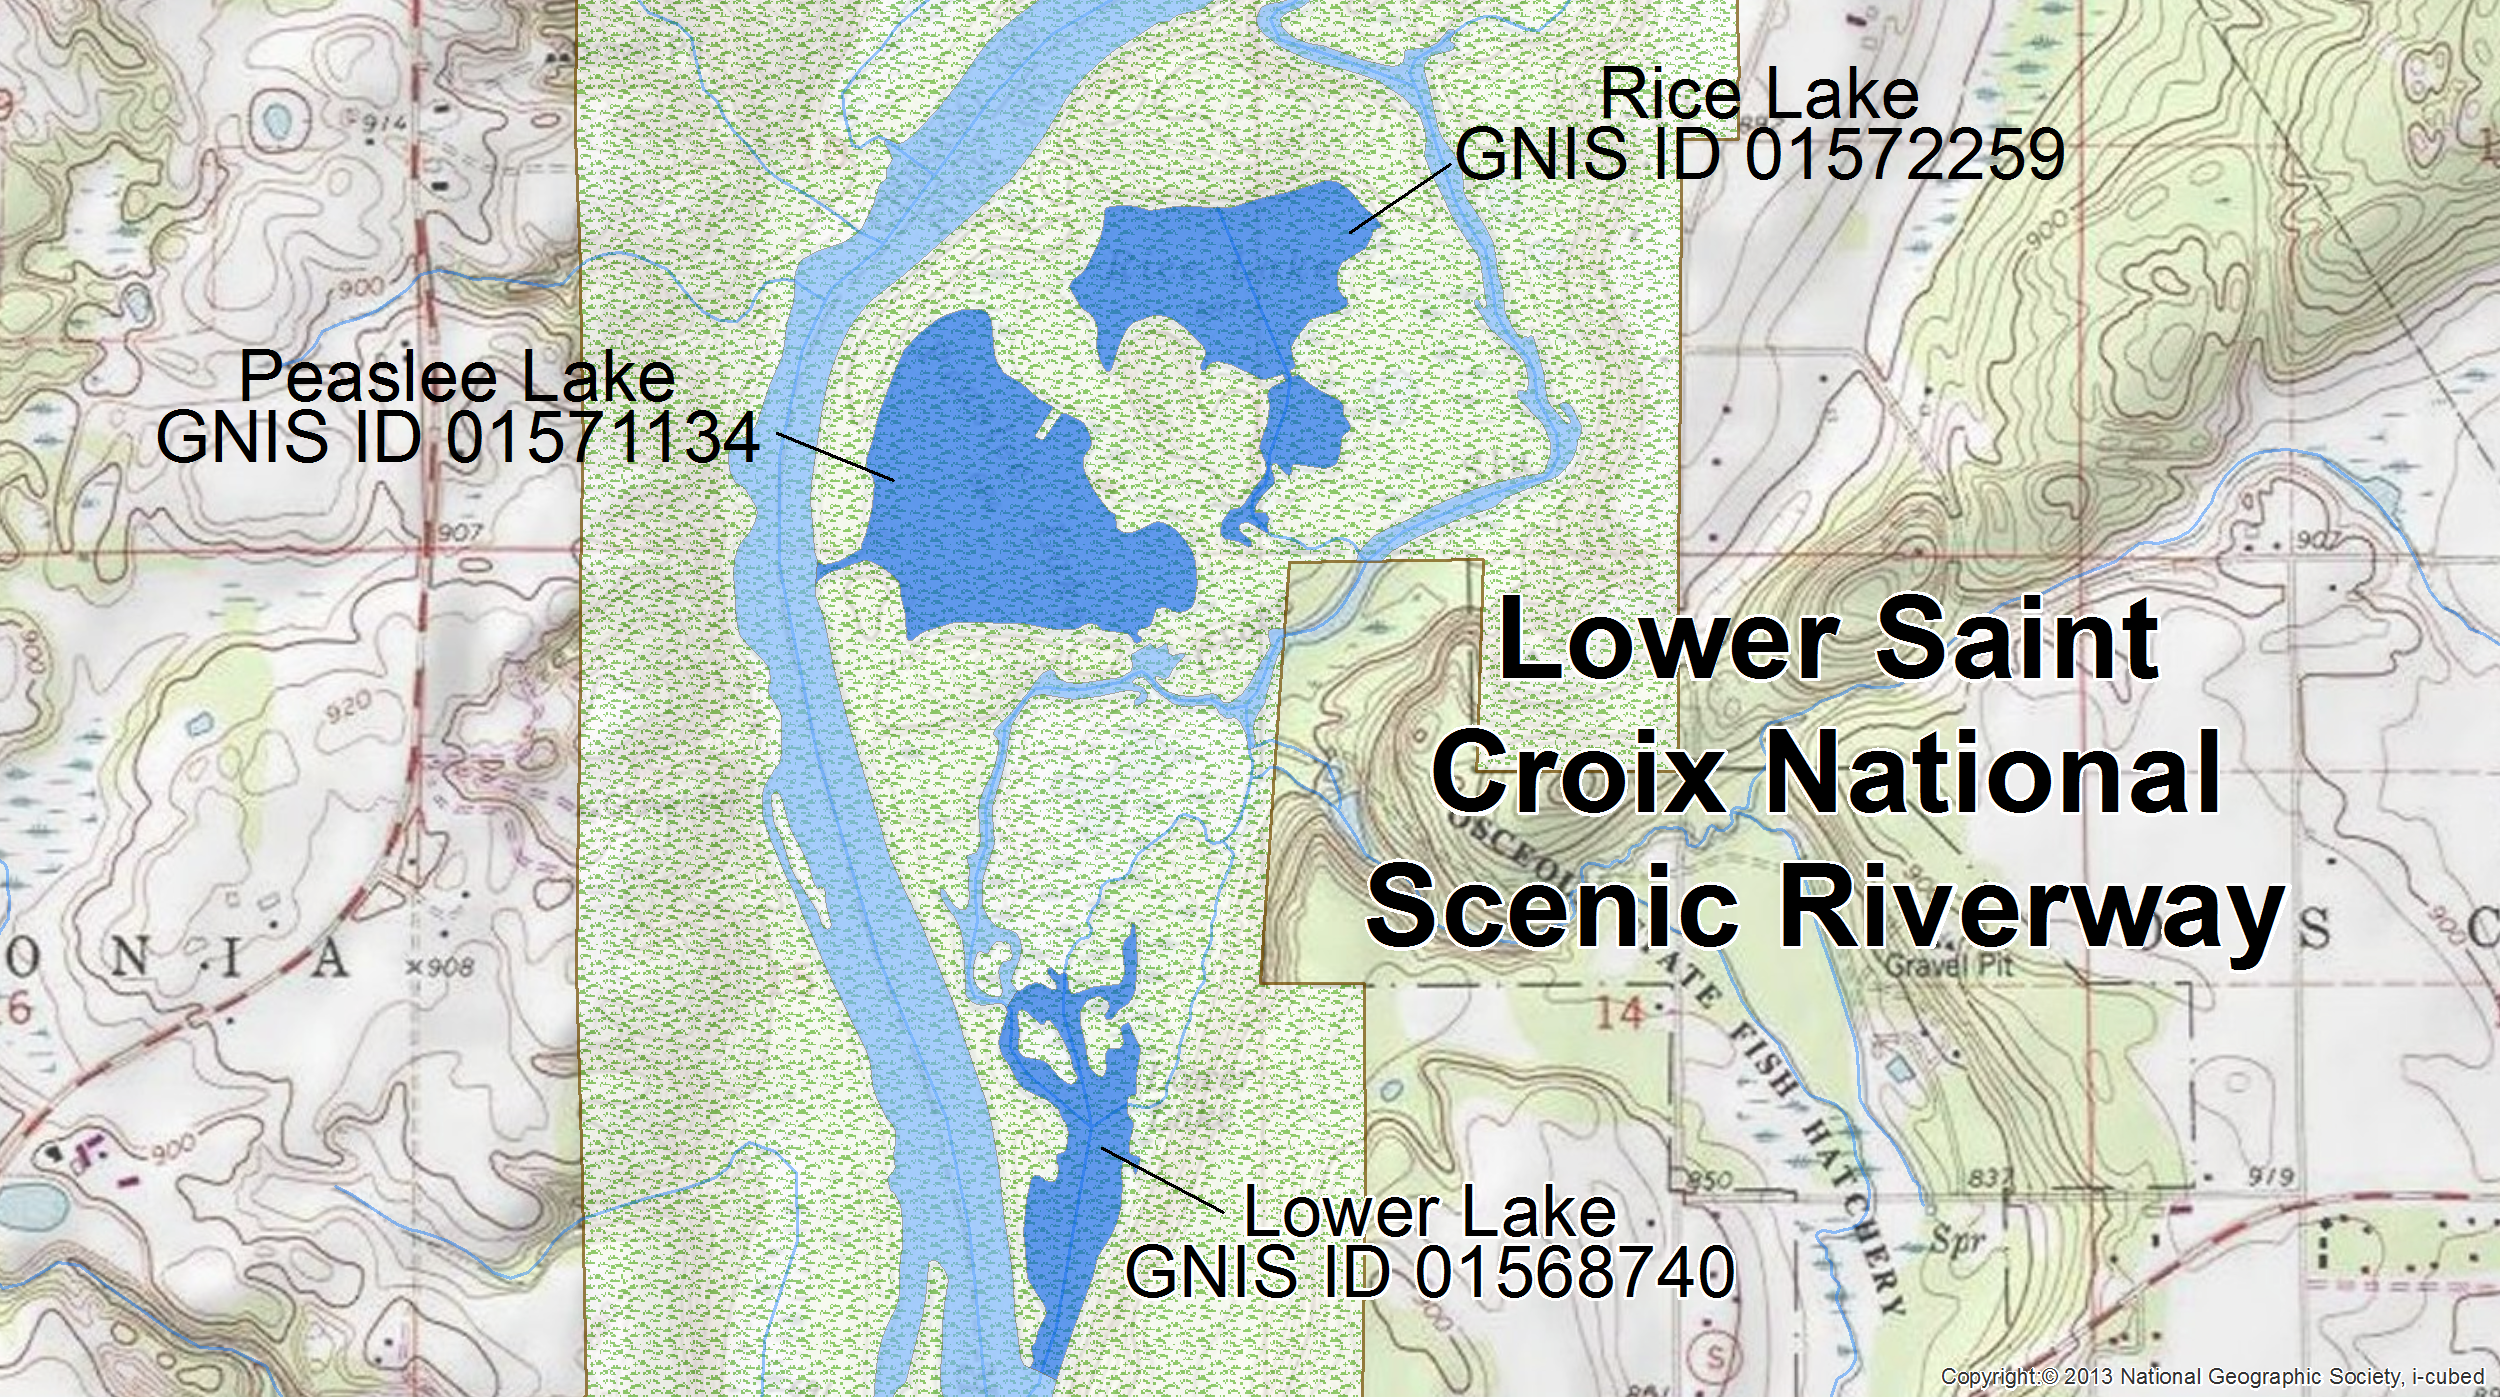 As shown in Lower Saint Croix National Scenic Riverway, the blue polygons are Rice Lake, Peaslee Lake, and Lower Lake. Since each polygon has unique GNIS names, they are each given a unique value in the "LakeCountID" field.